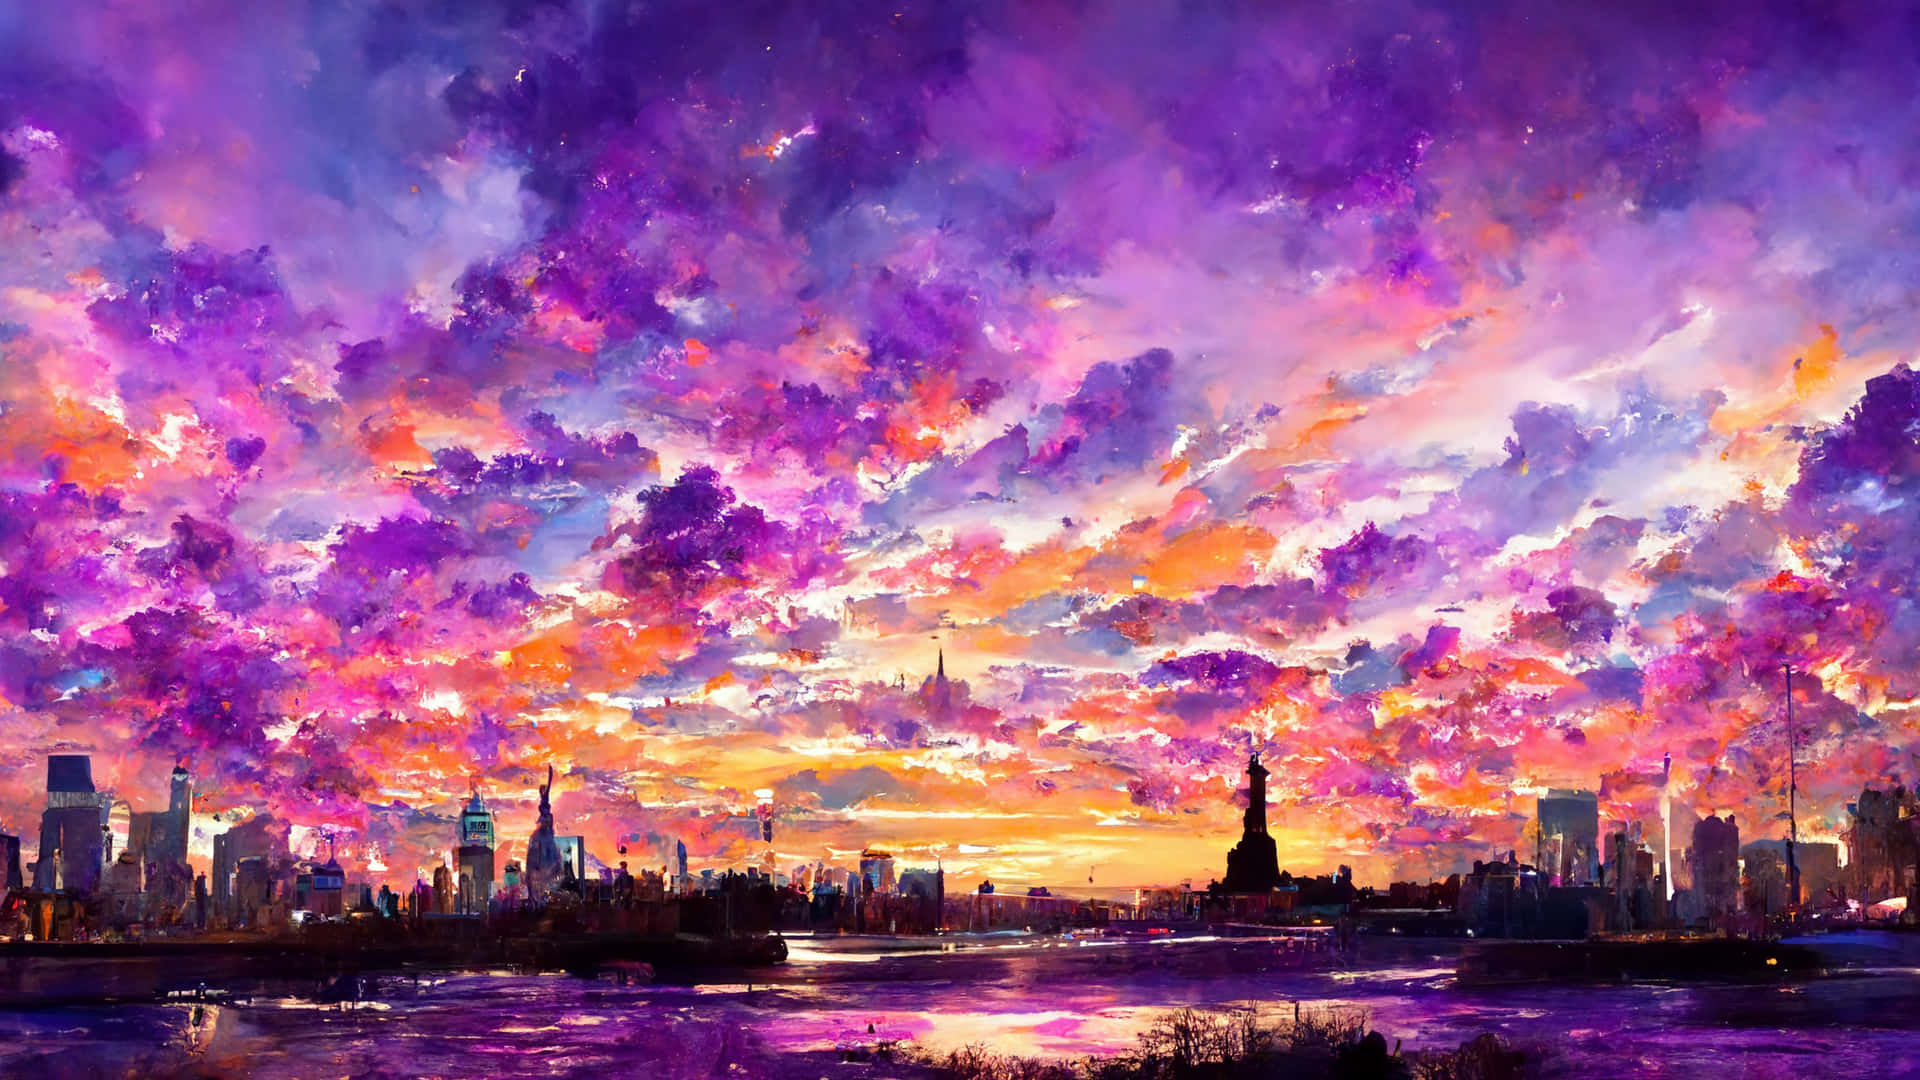 Take in the beautiful sight of a purple and blue sunset. Wallpaper